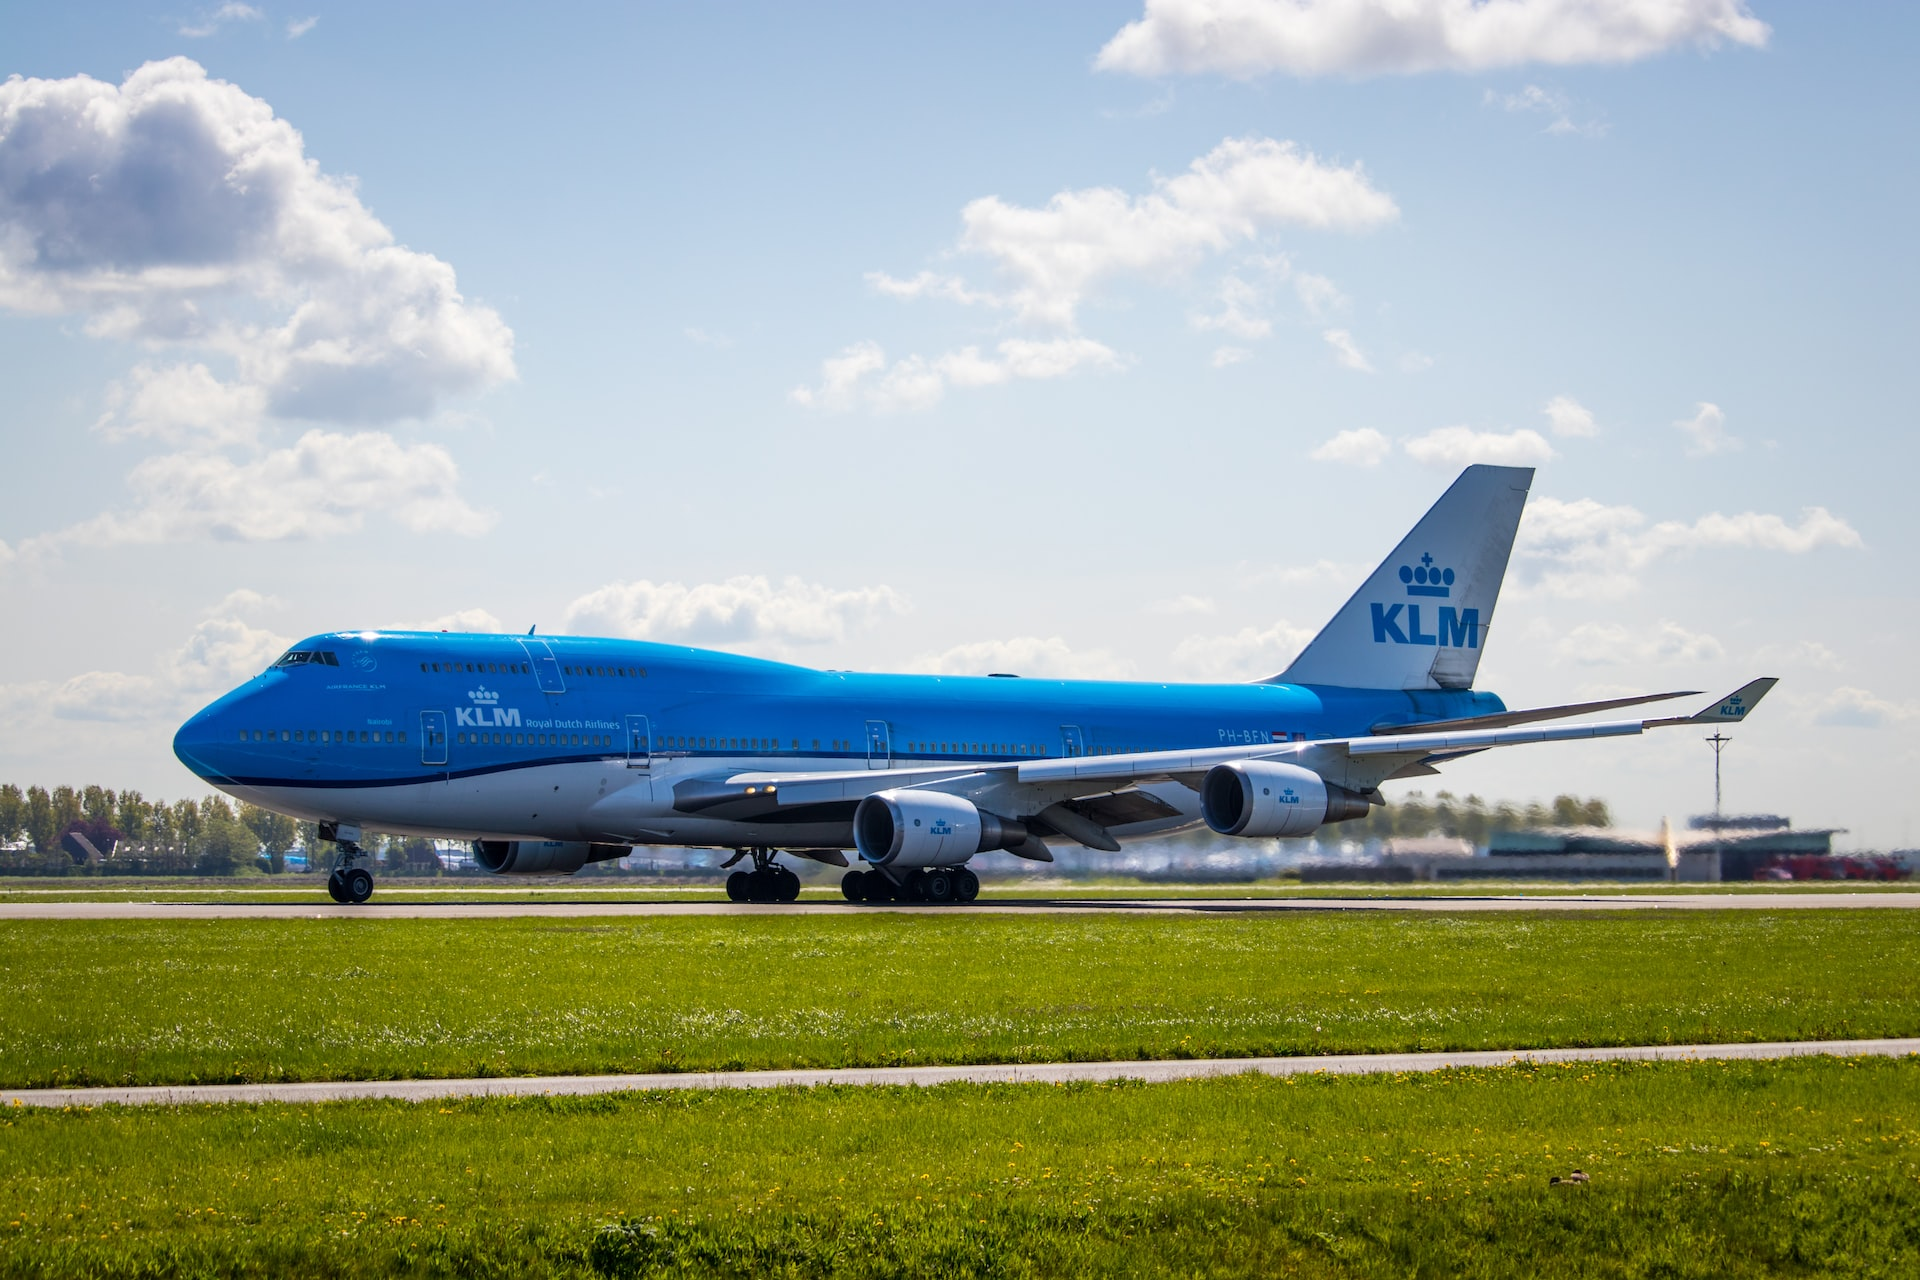 A KLM's triple decker plane Boeing 747 taxiing on the runway.